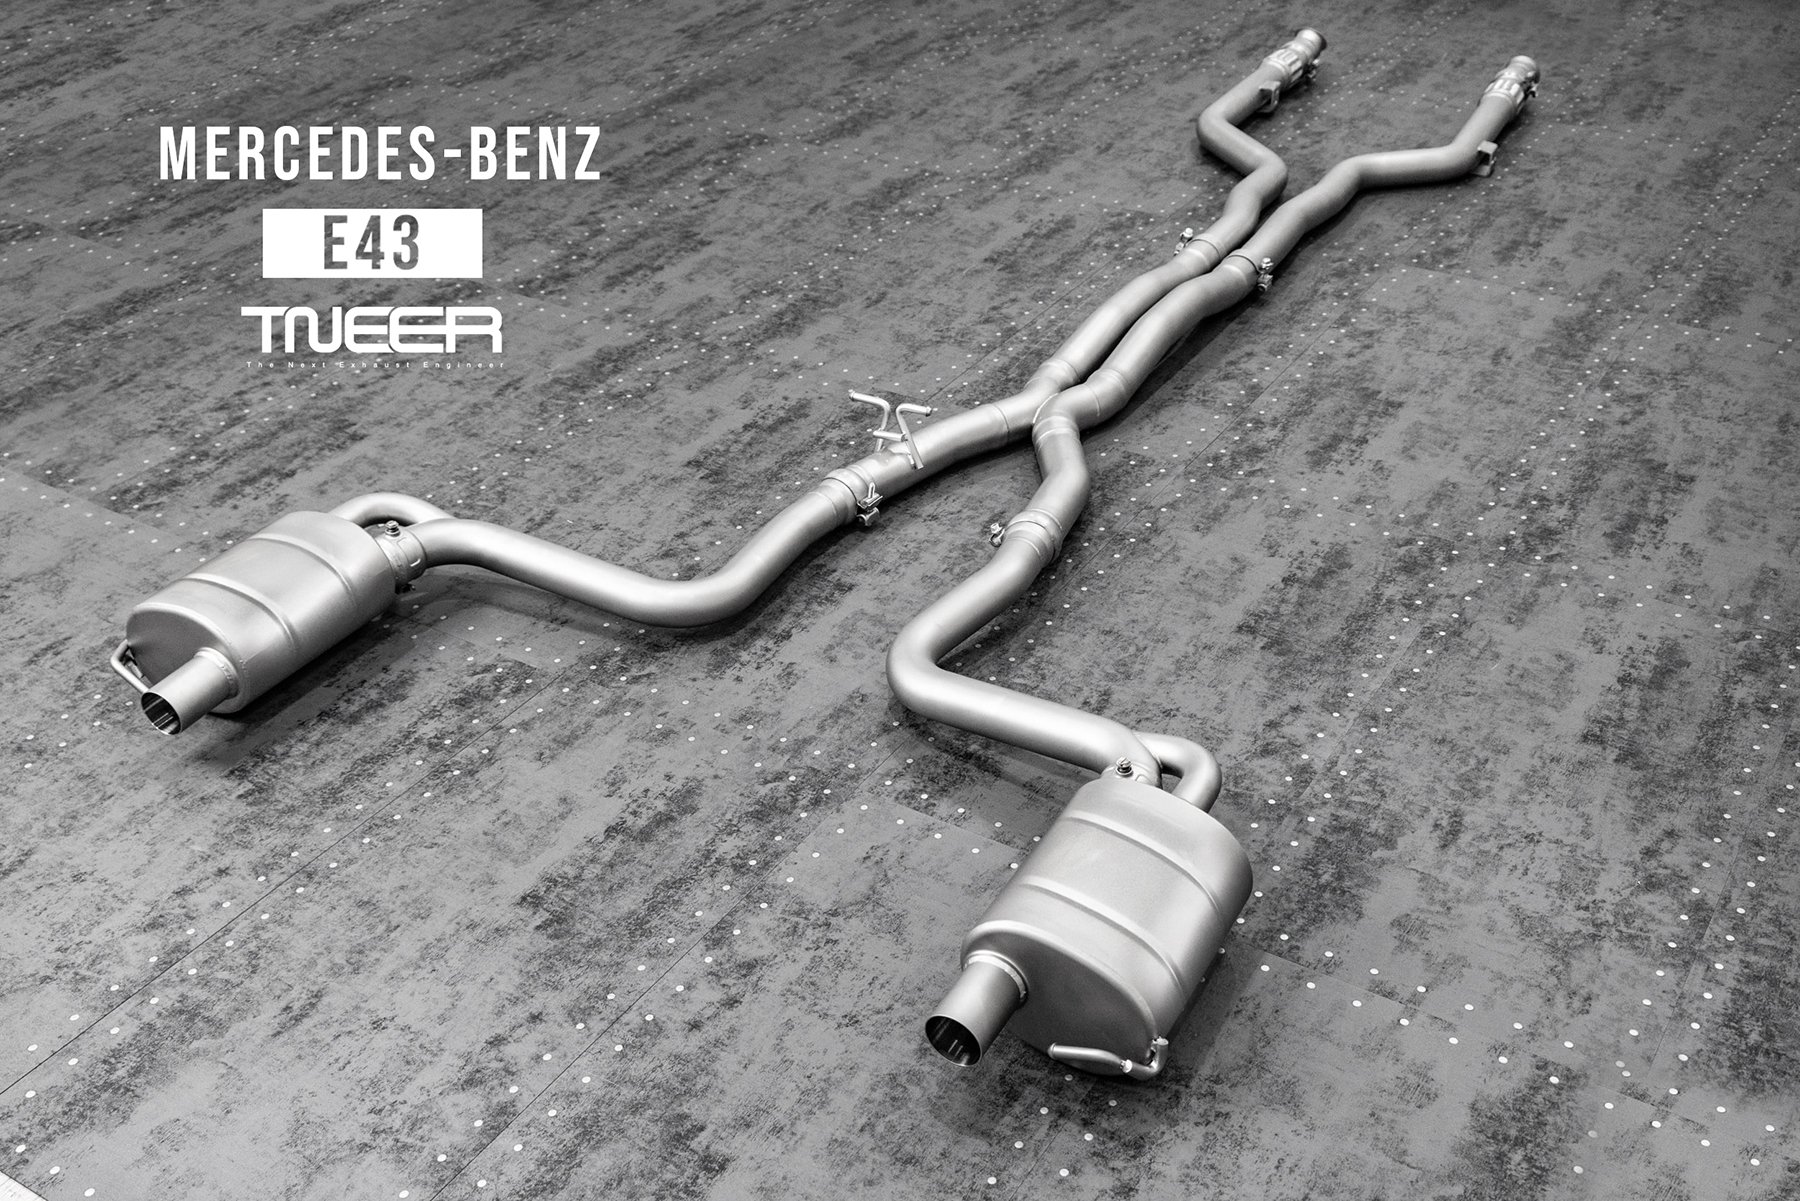 Mercedes-AMG C238 E43 Coupe TNEER Performance Exhaust System